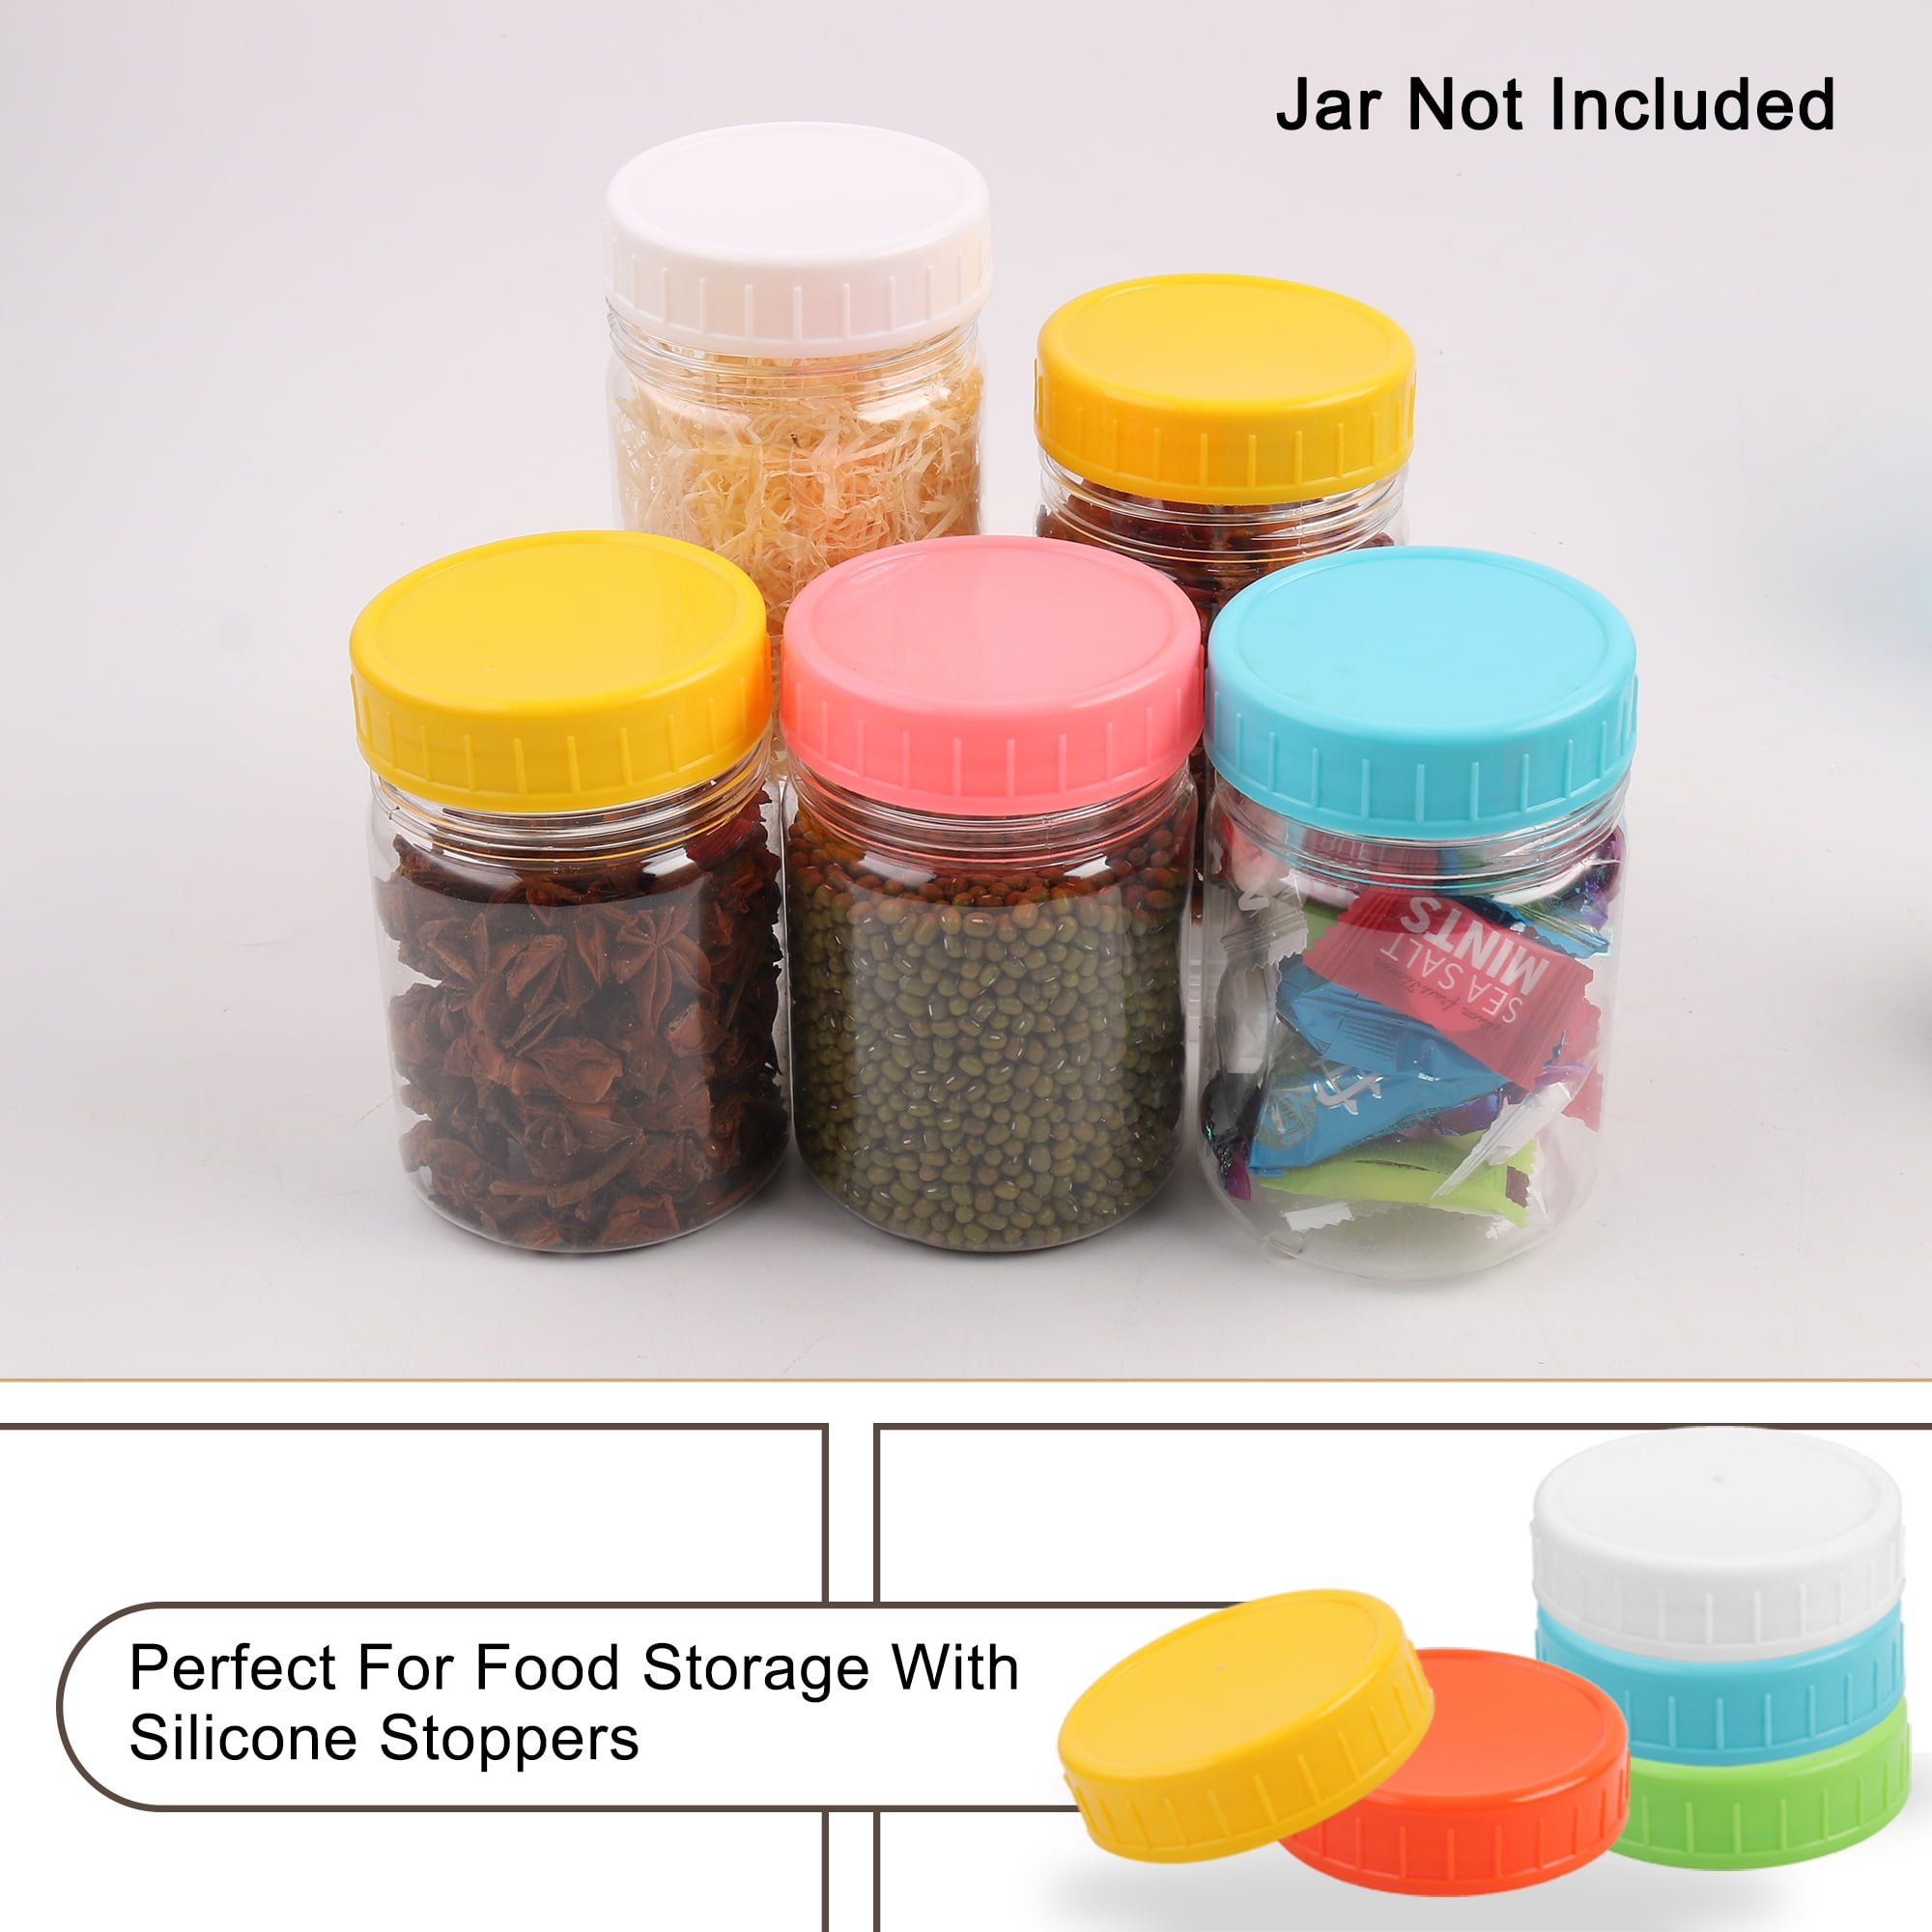 Plastic Unlined Ribbed Screw Lids Cap for Regular//Wide Mouth Mason Jars Canning